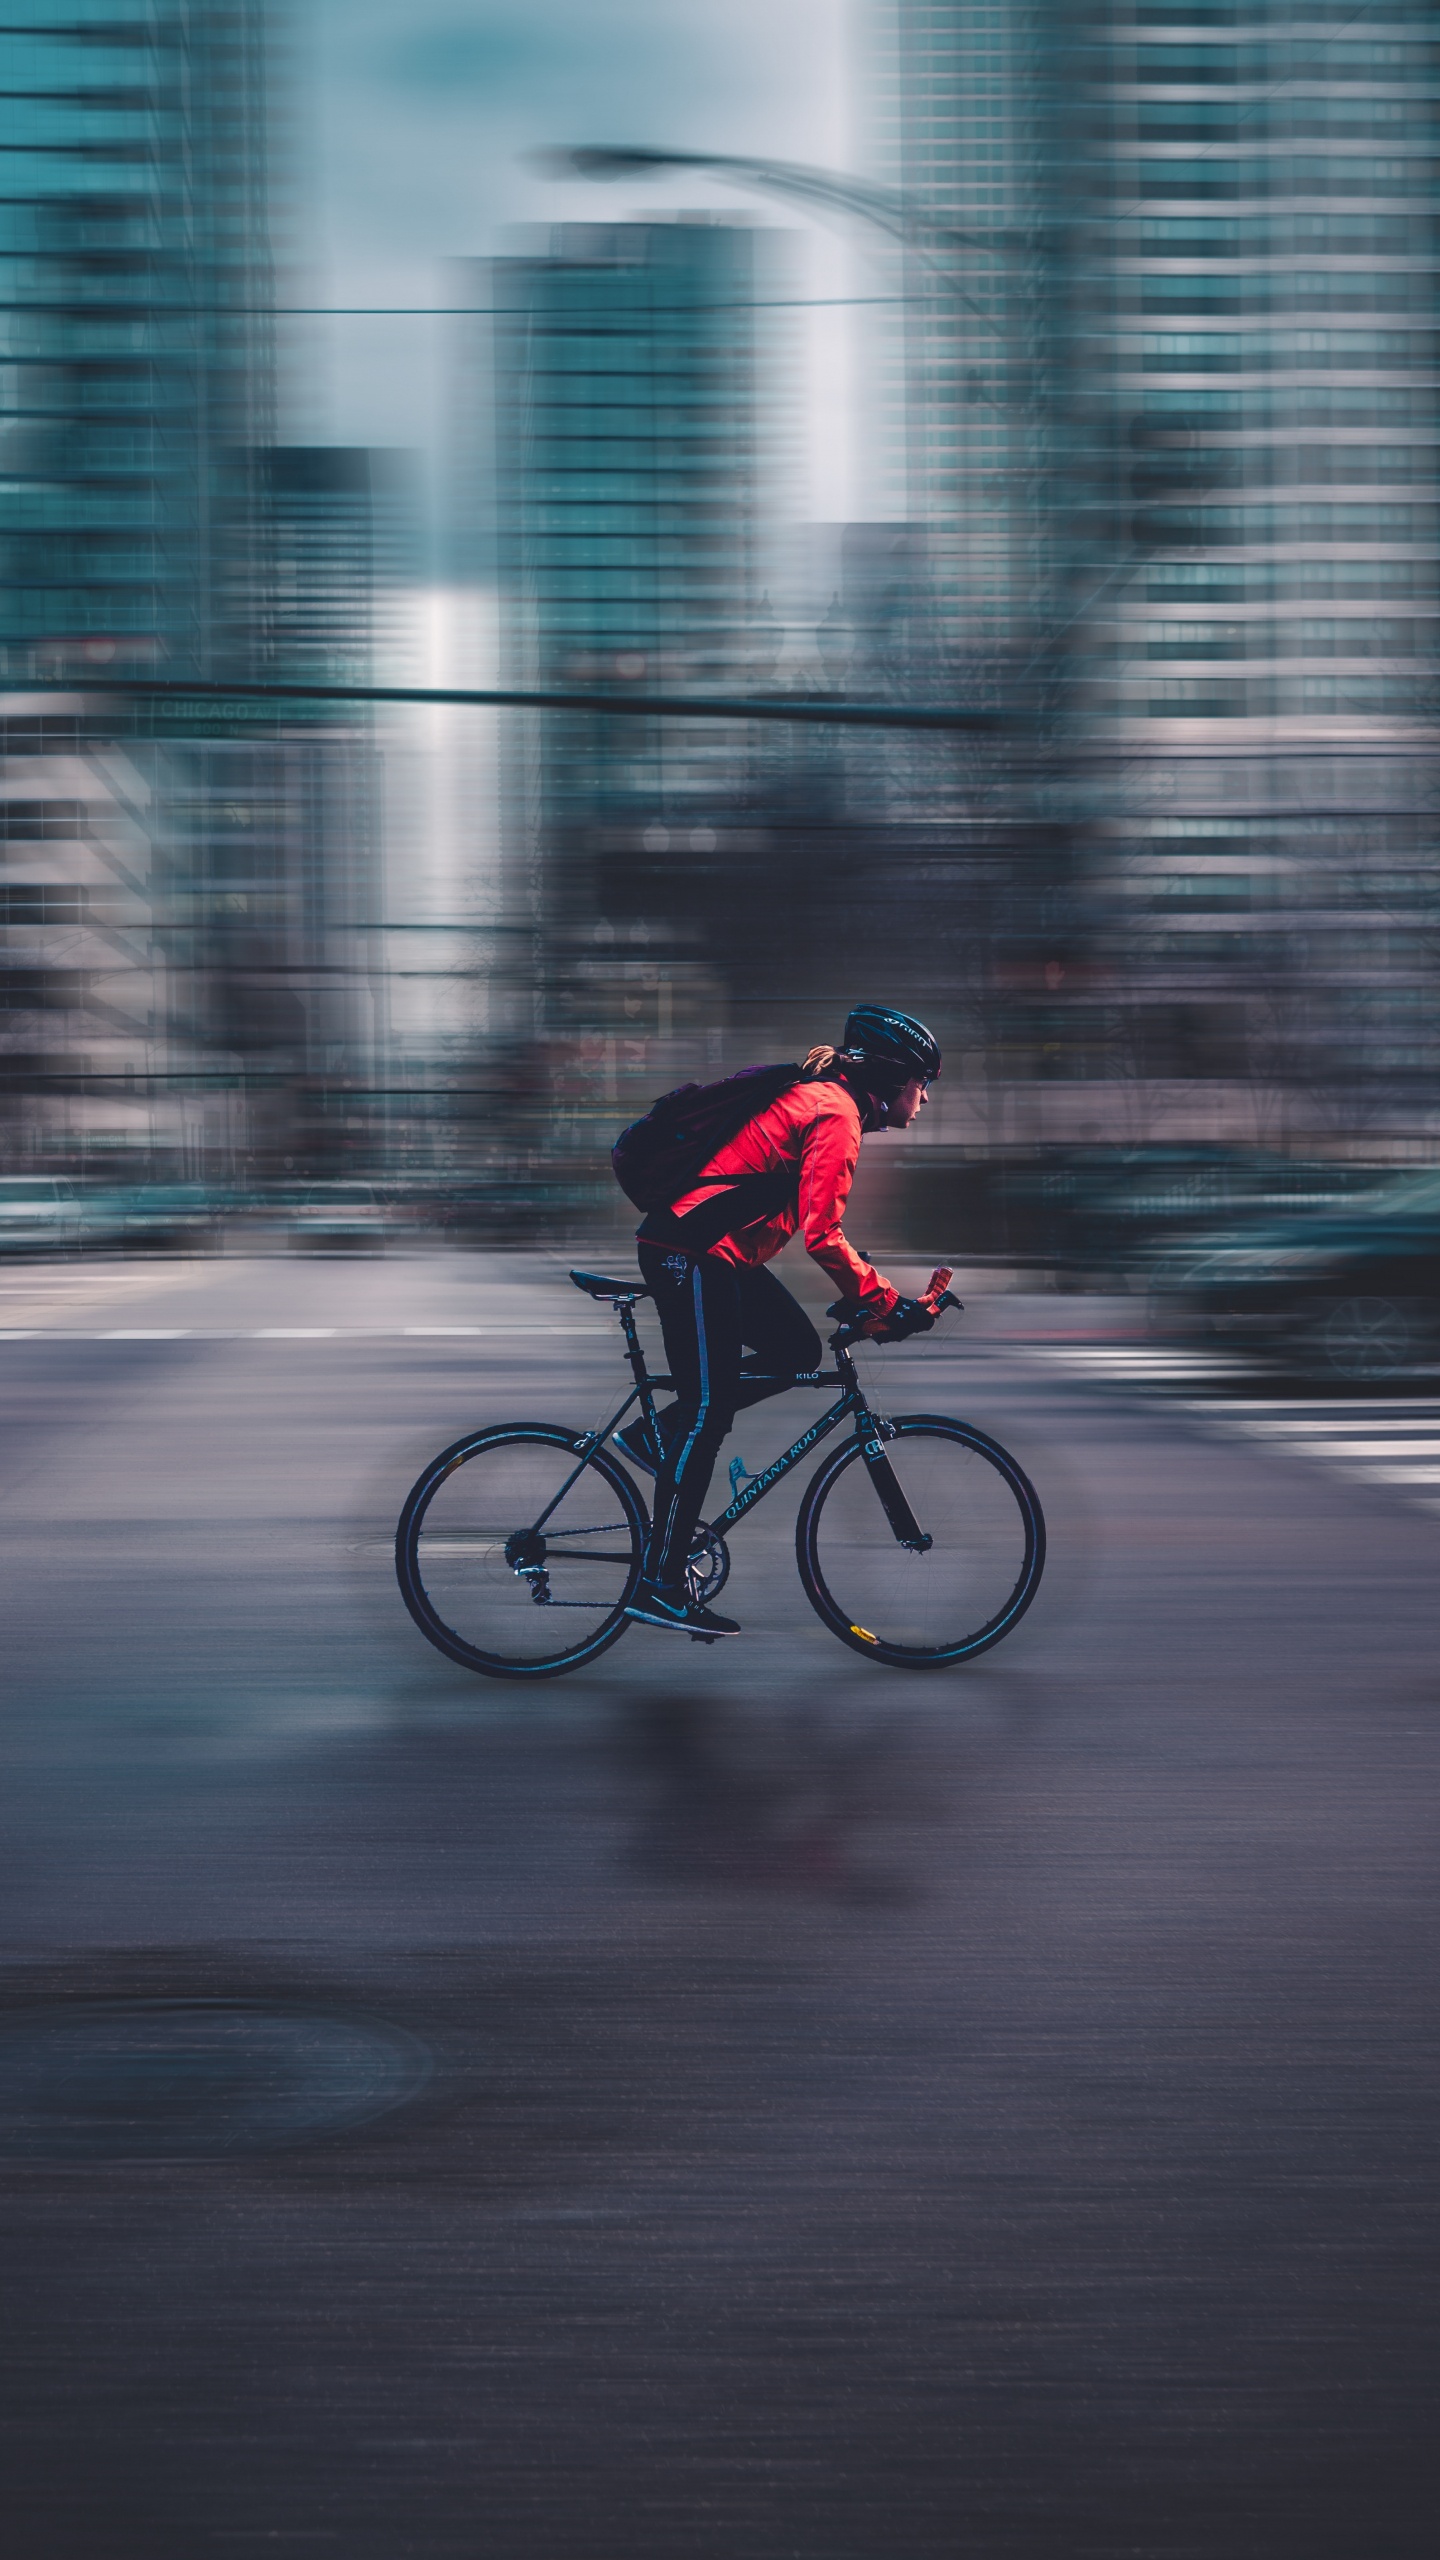 Man in Red Jacket Riding Bicycle Sur Route Pendant la Journée. Wallpaper in 1440x2560 Resolution